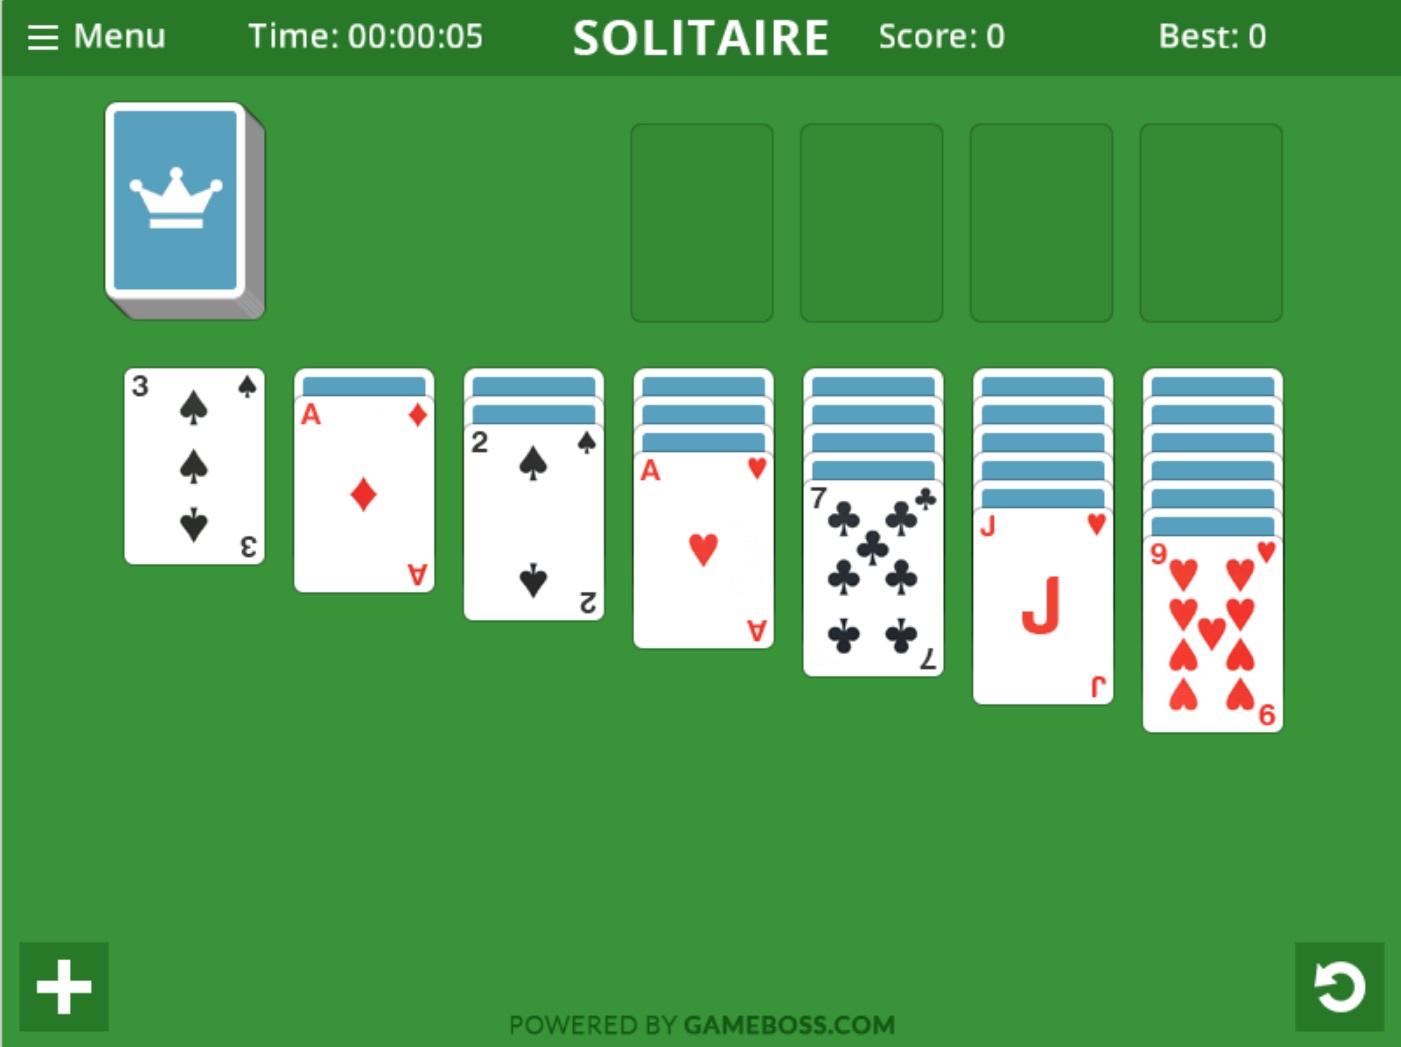 klondike solitaire forever cards are blank inwindows 10